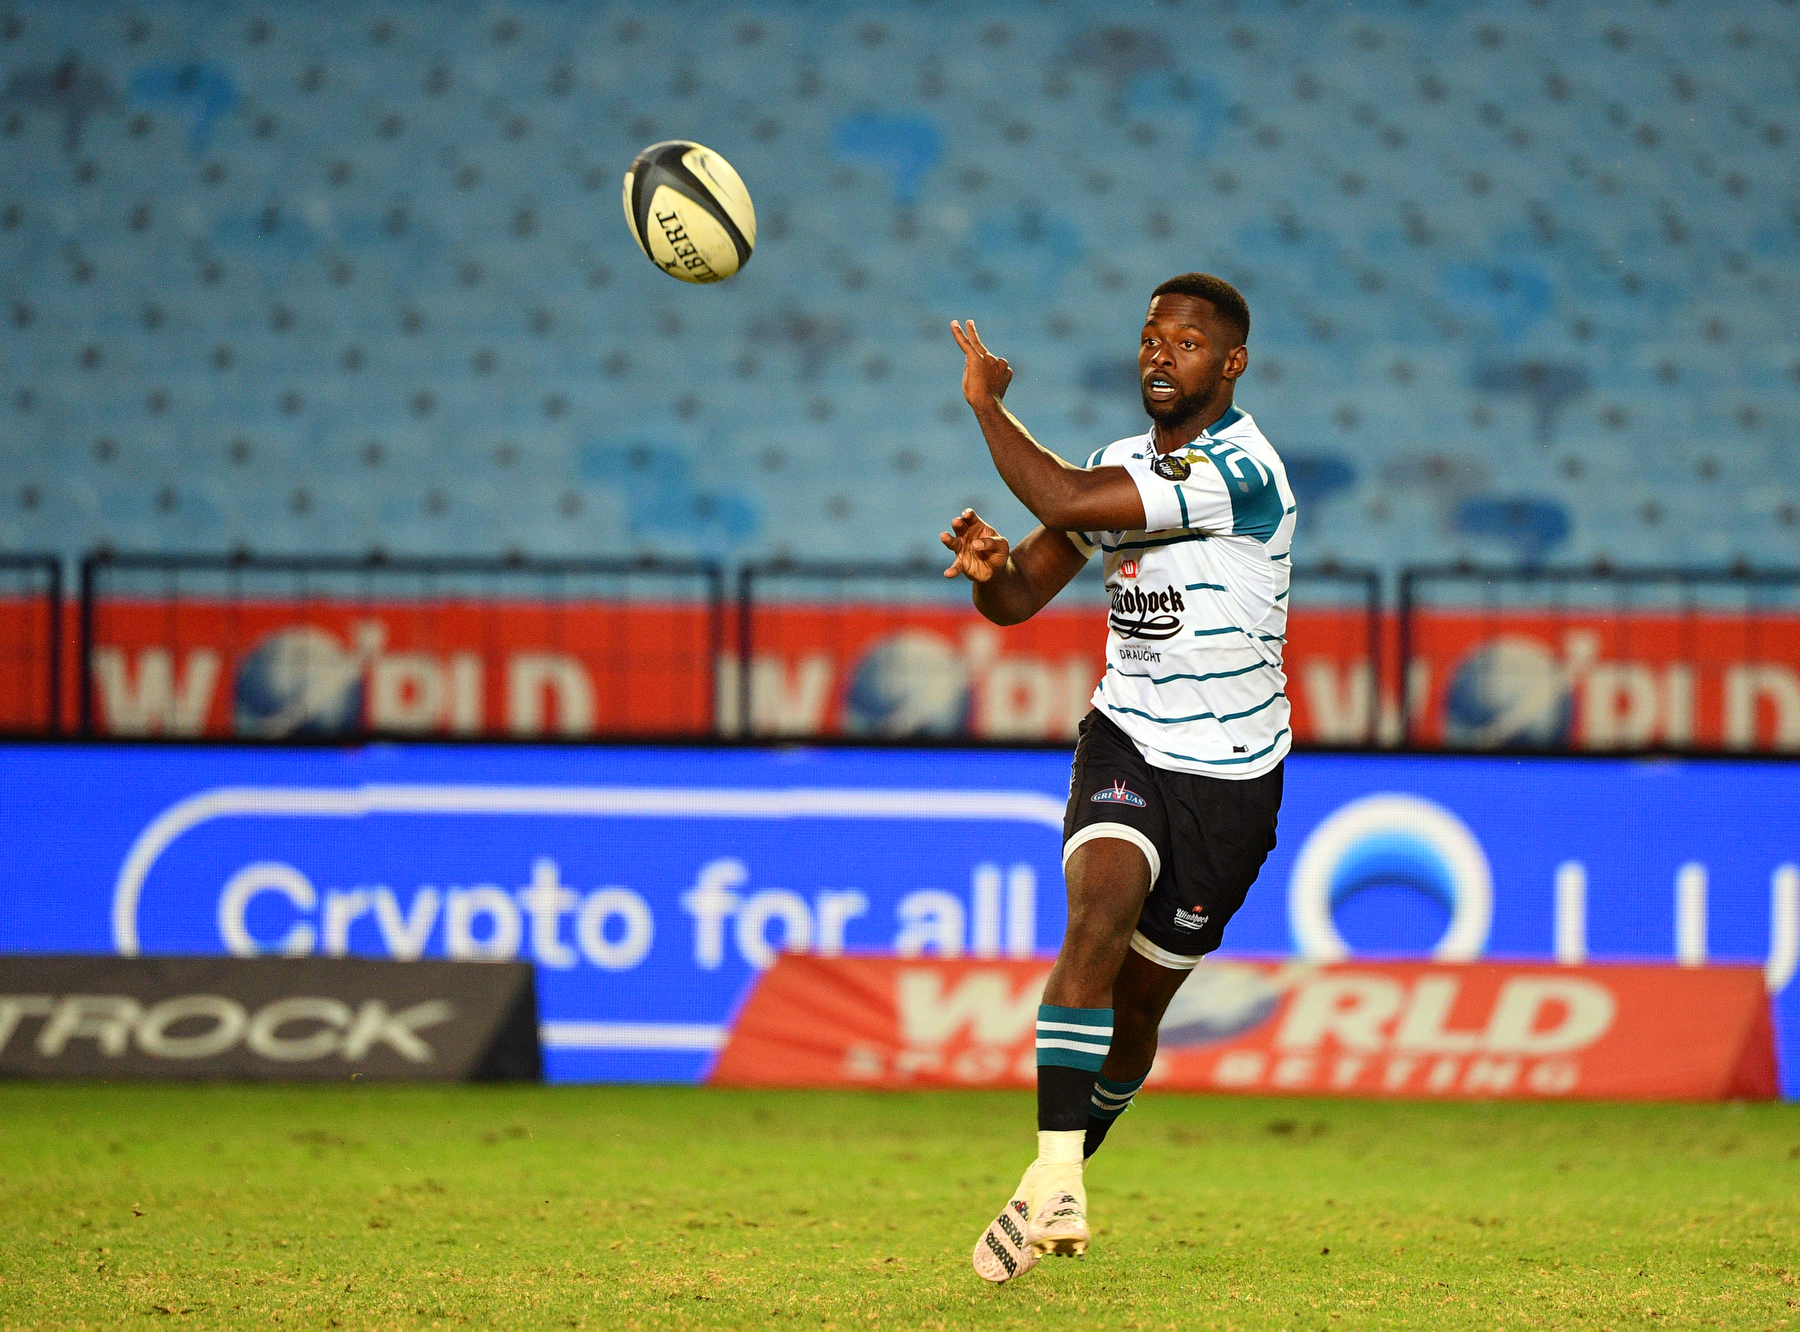 PRETORIA, SOUTH AFRICA - APRIL 07: Lubabalo Dobela of the Griquas during the Currie Cup, Premier Division match between Vodacom Bulls and Windhoek Draught Griquas at Loftus Versfeld on April 07, 2023 in Pretoria, South Africa.